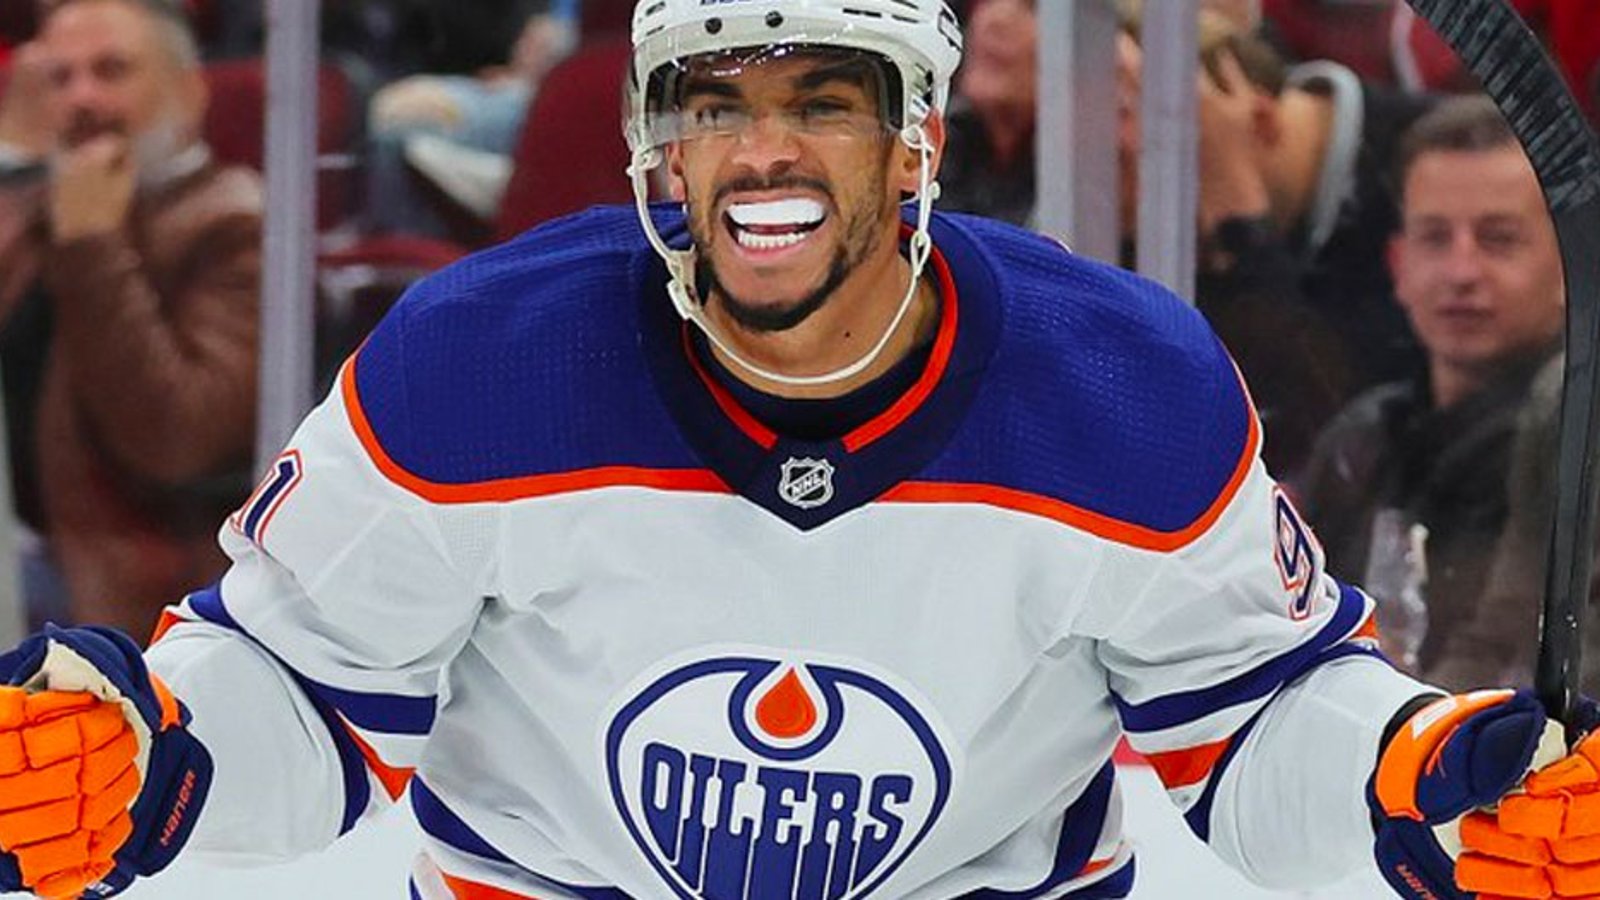 Evander Kane returns, Oilers make a move to get under the salary cap